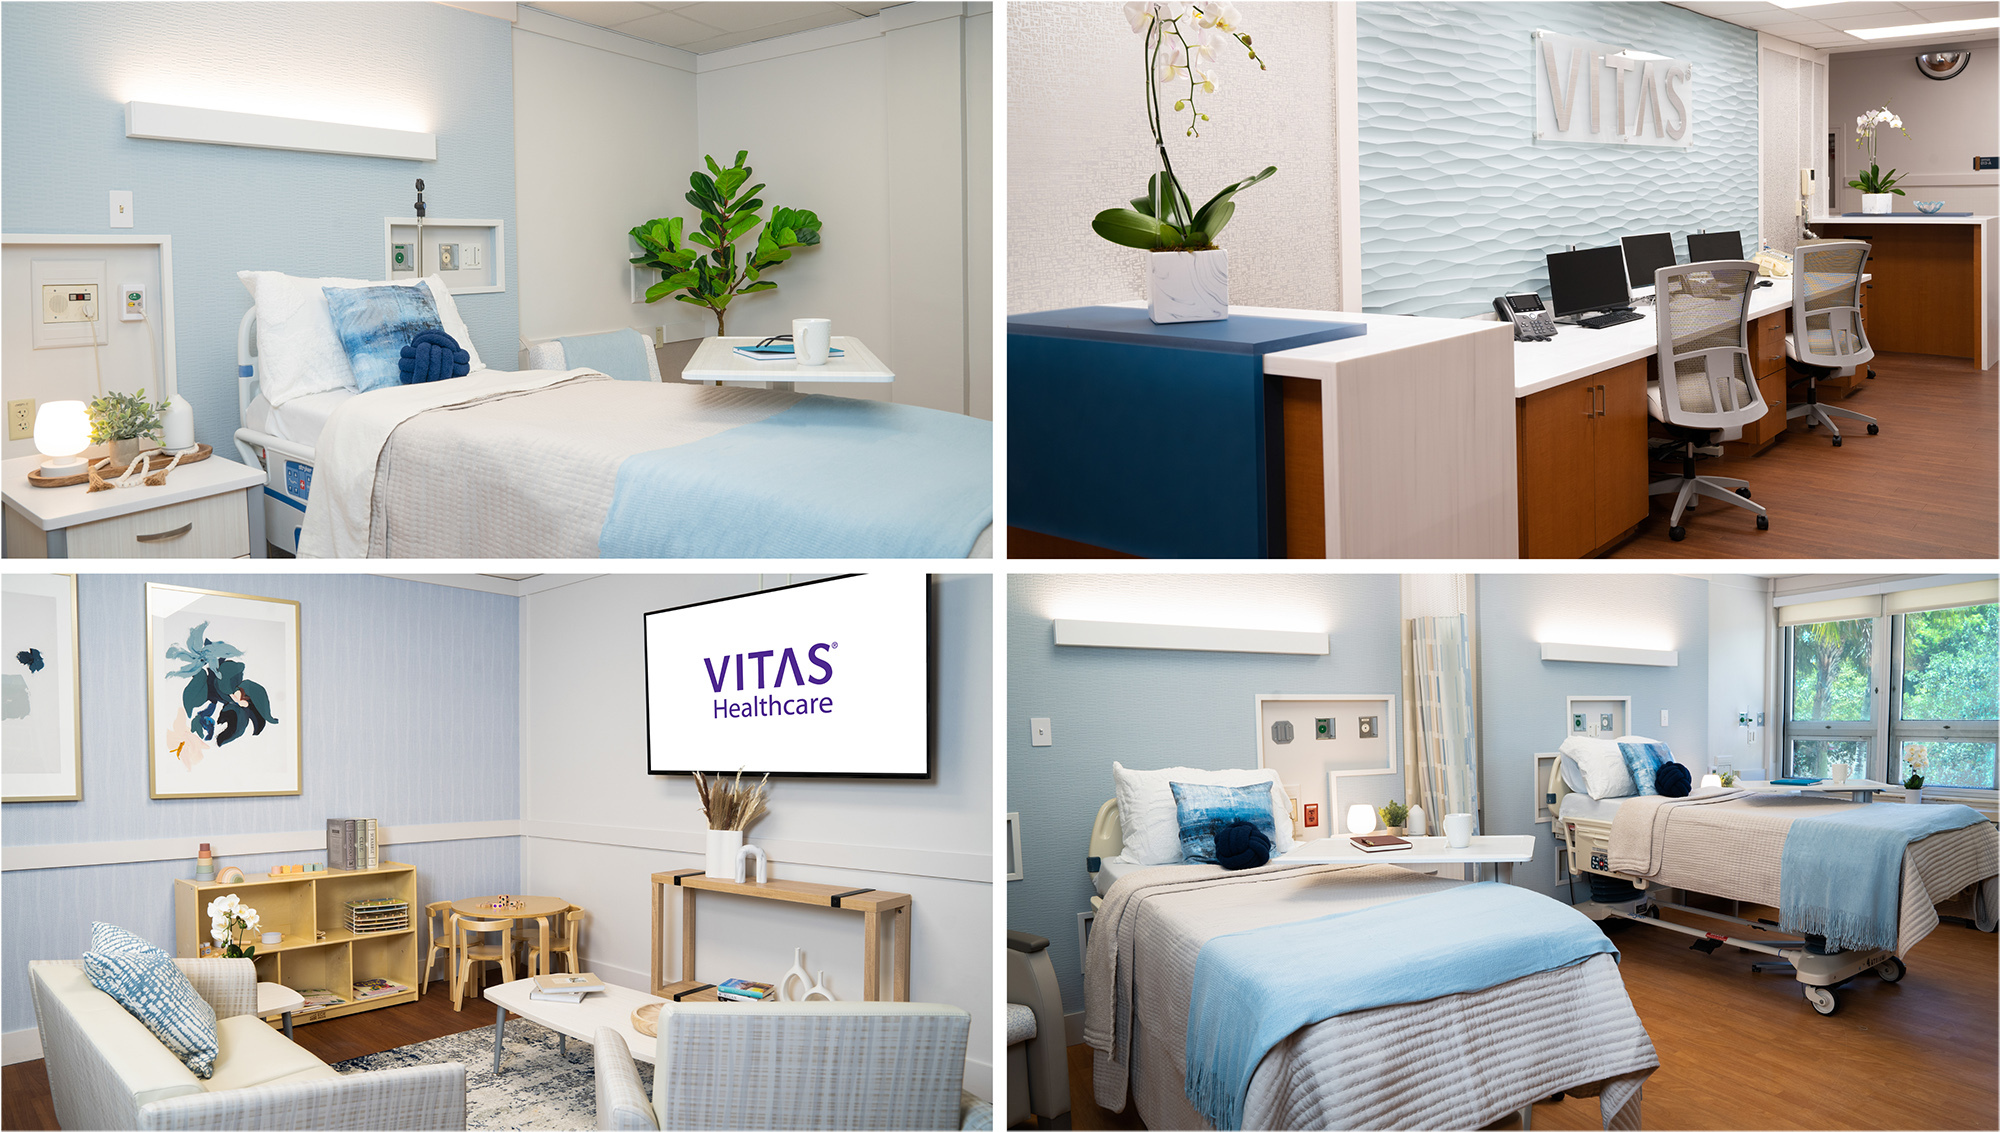 The VITAS Inpatient Hospice Unit at Broward Health Medical Center features comfortable rooms in a home-like environment with overnight accommodations for visiting loved ones.